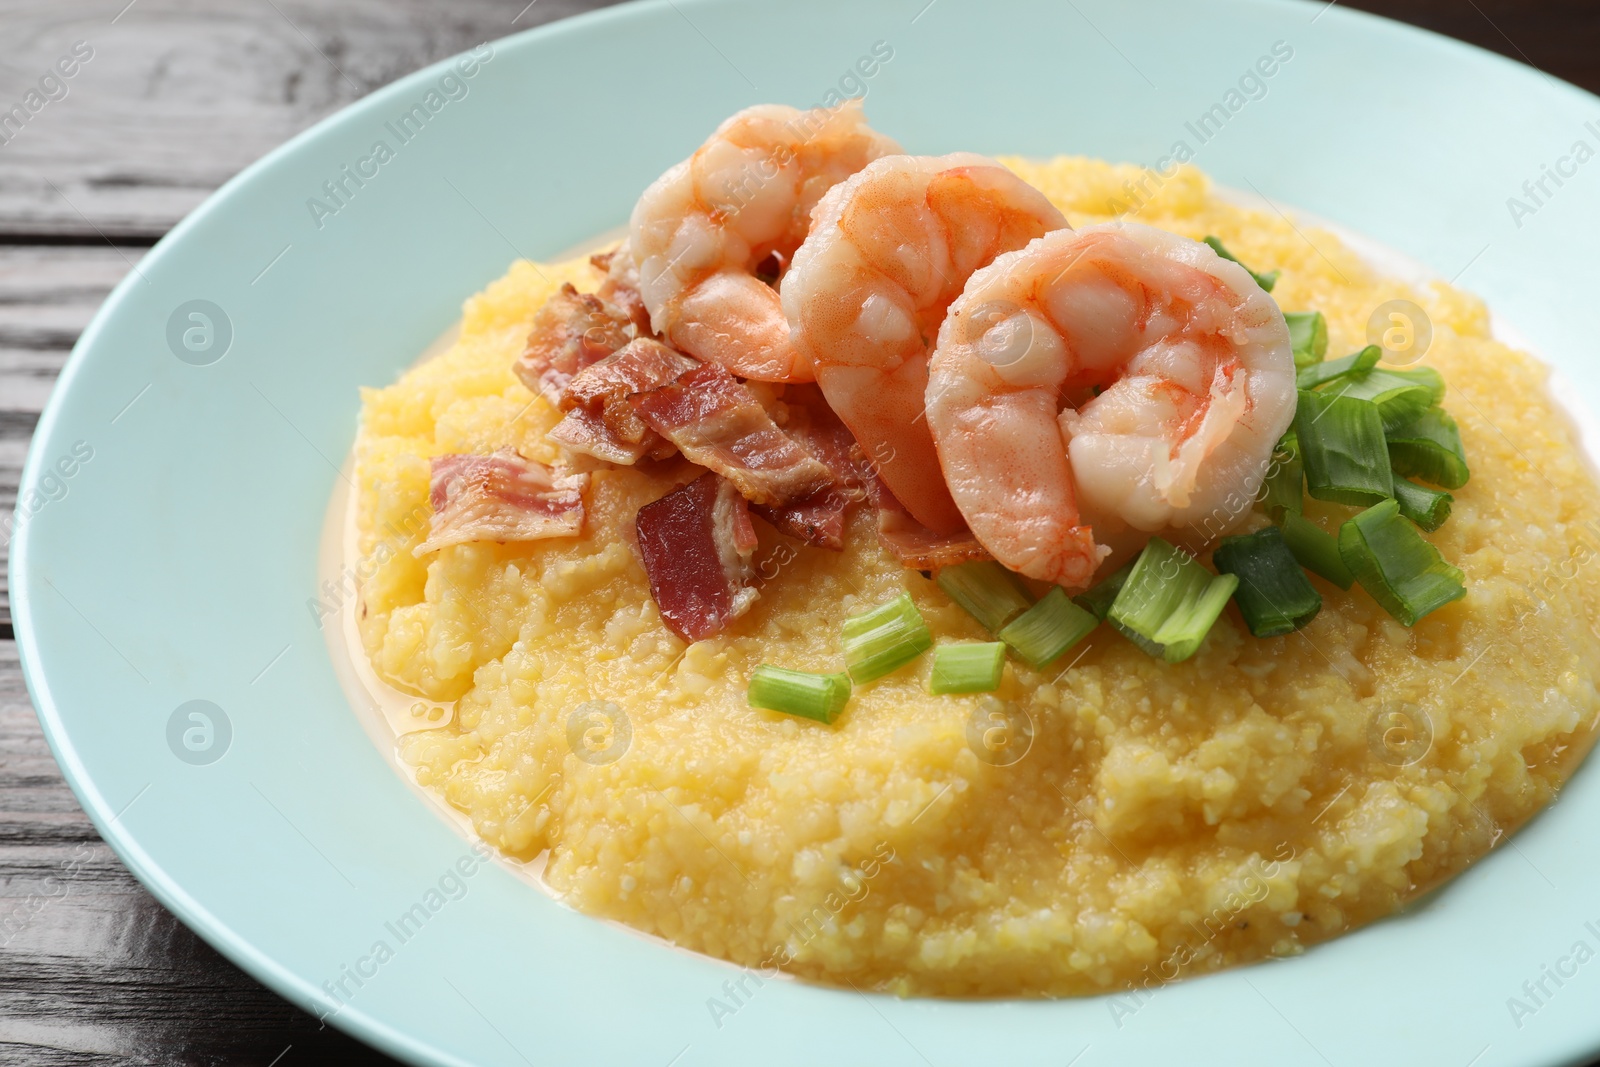 Photo of Plate with fresh tasty shrimps, bacon and grits on dark wooden table, closeup